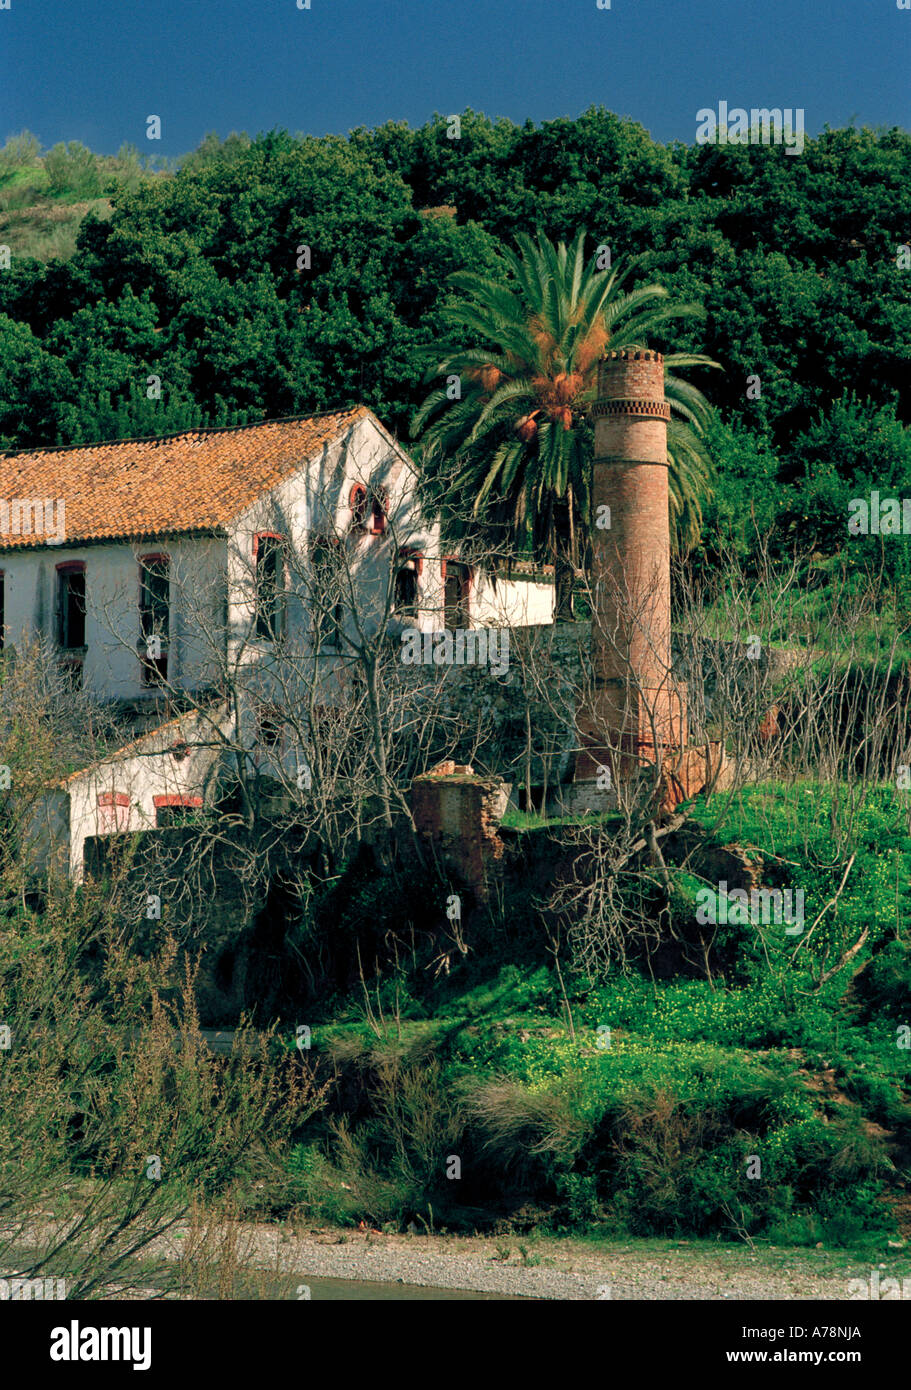 An abandoned Sugar mill on the banks of the Veez river, near Malaga, Andalusia, southern Spain Stock Photo